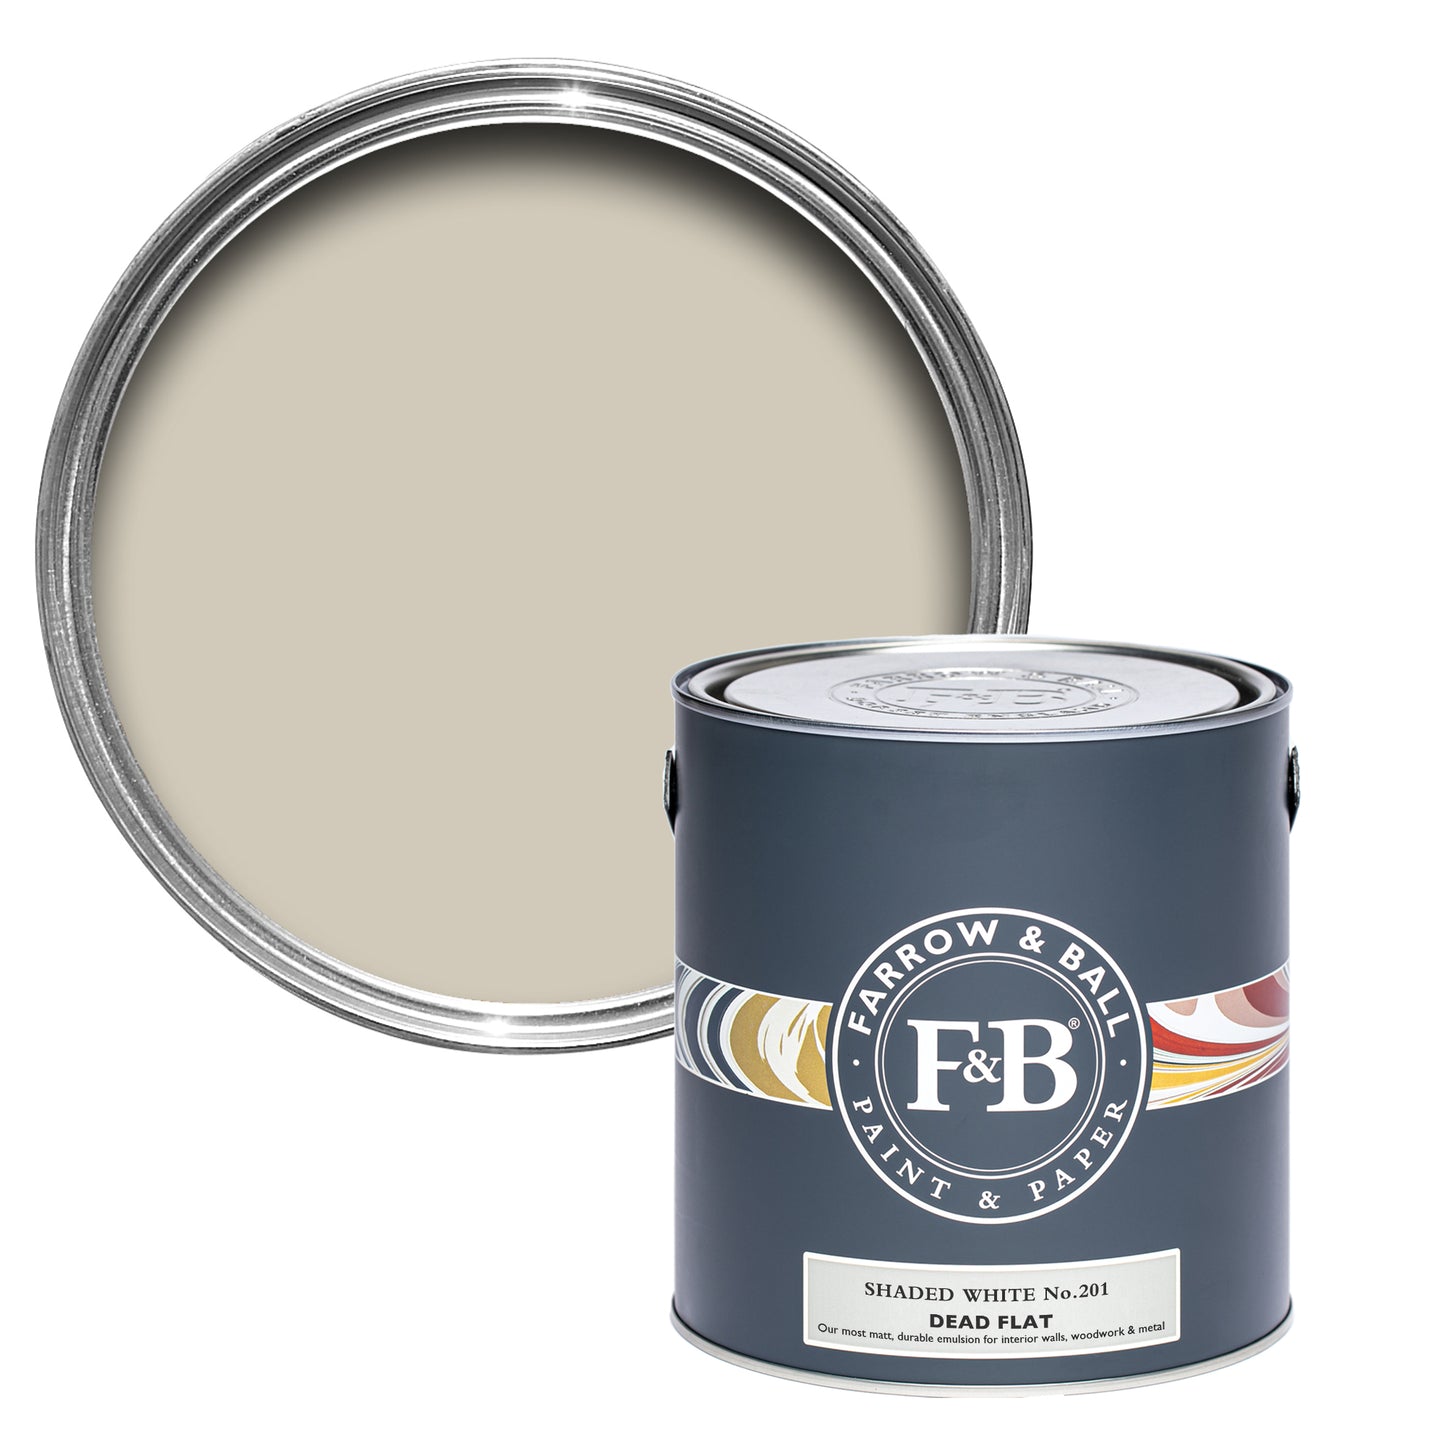 Dead Flat - Farrow and Ball - Shaded White 201 - Allround